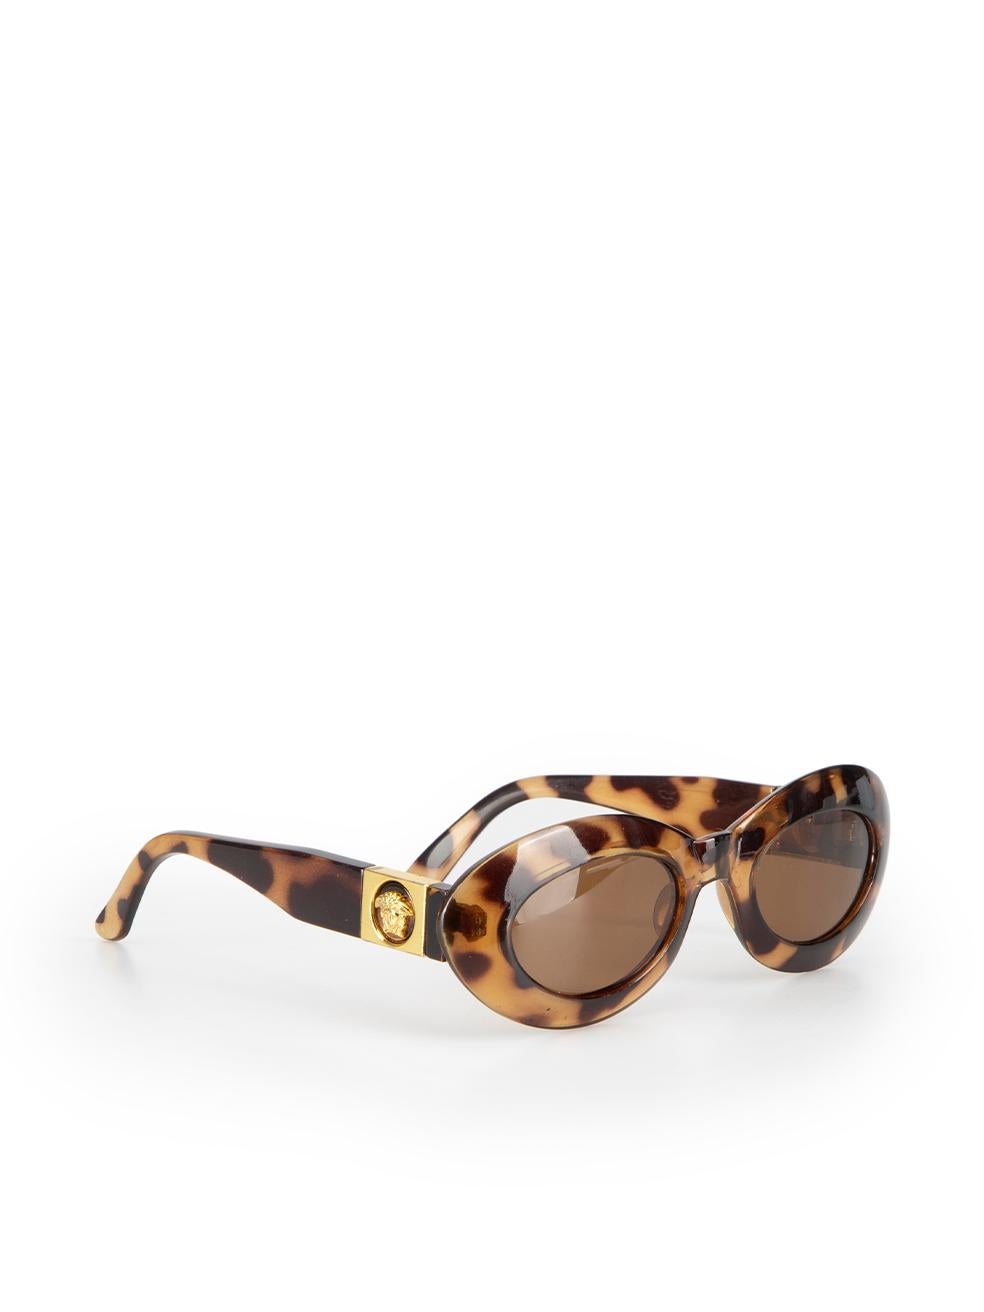 CONDITION is Good. Minor wear to sunglasses is evident. Light wear to front, arms, and logos with scuffs and scratches on this used Versace designer resale item. These sunglasses come with original case.



Details


Brown

Plastic

Oval